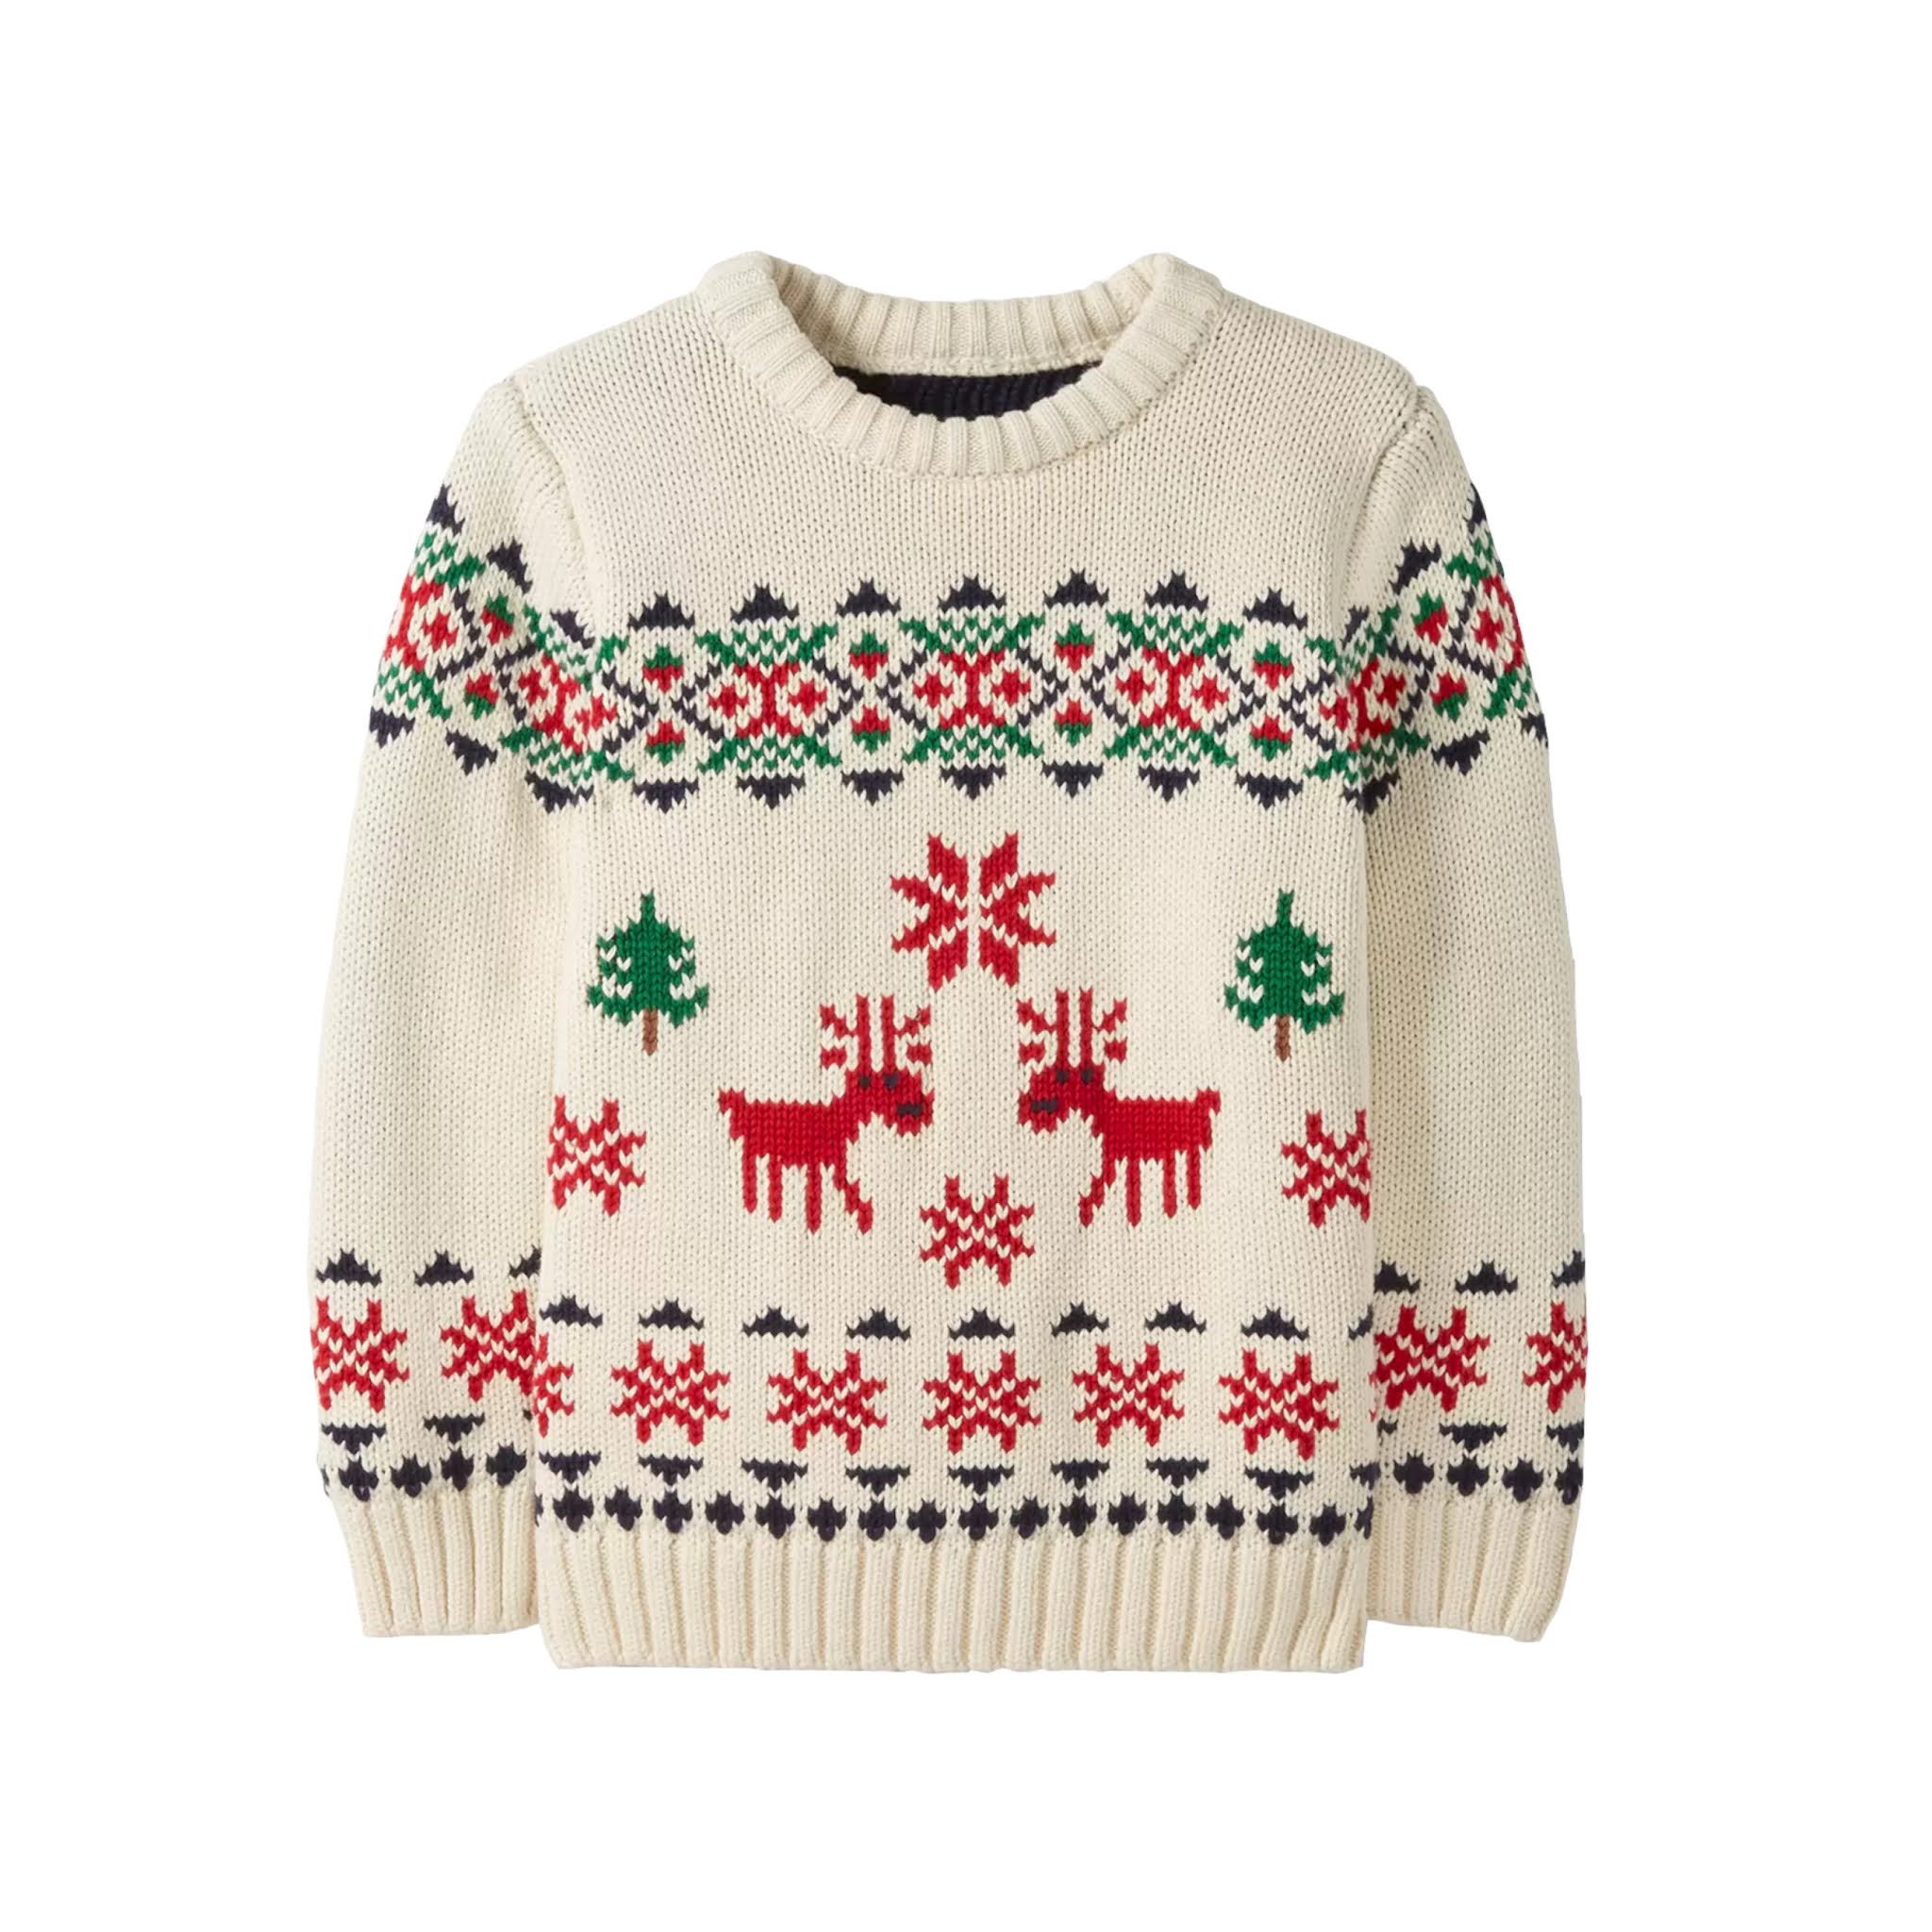 Kids Deer Sweater from Hanna Andersson